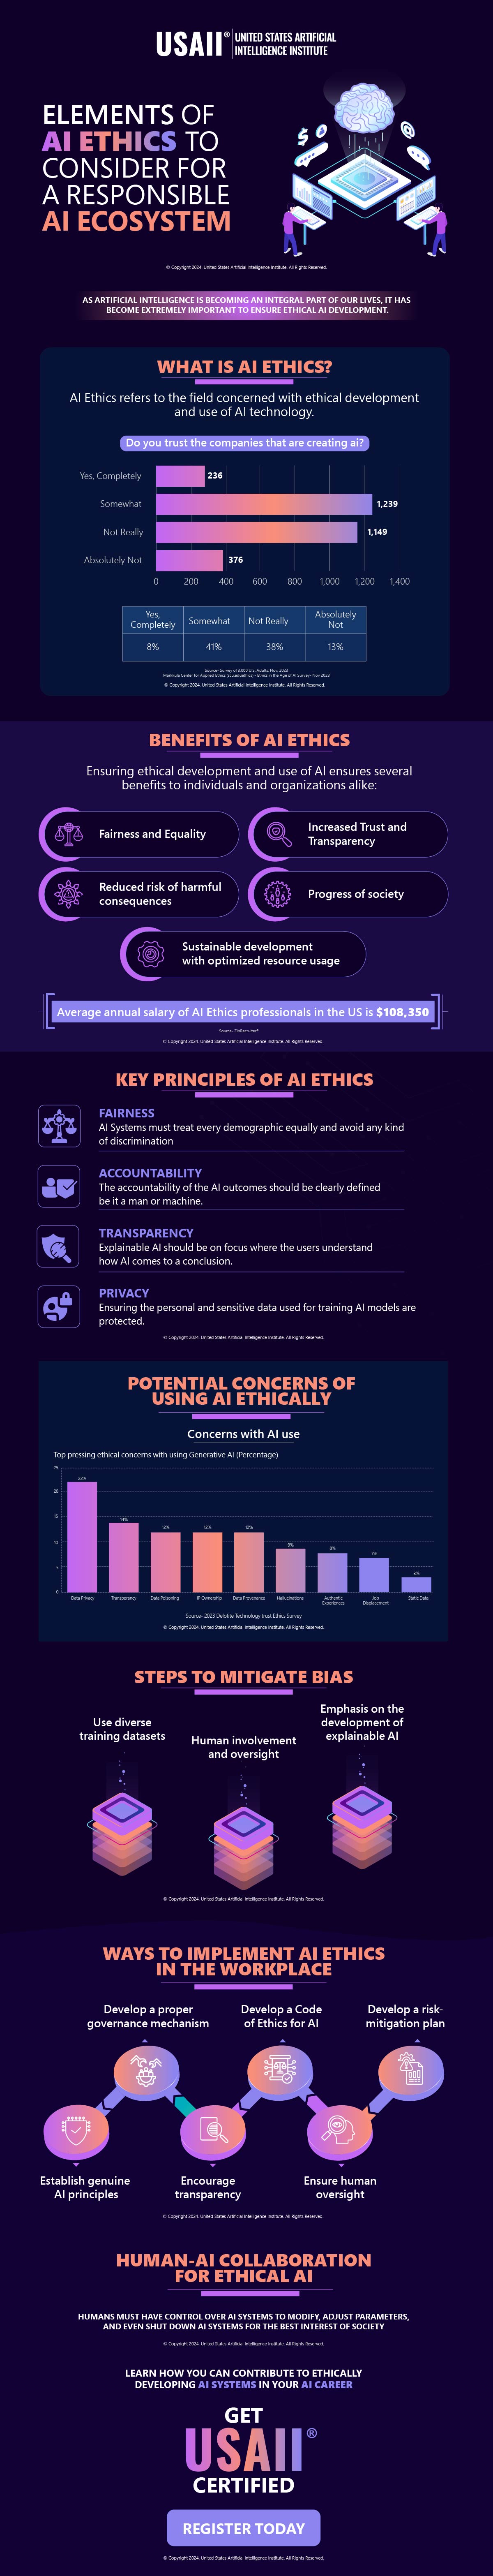 Elements of AI Ethics to Consider for a Responsible AI Ecosystem